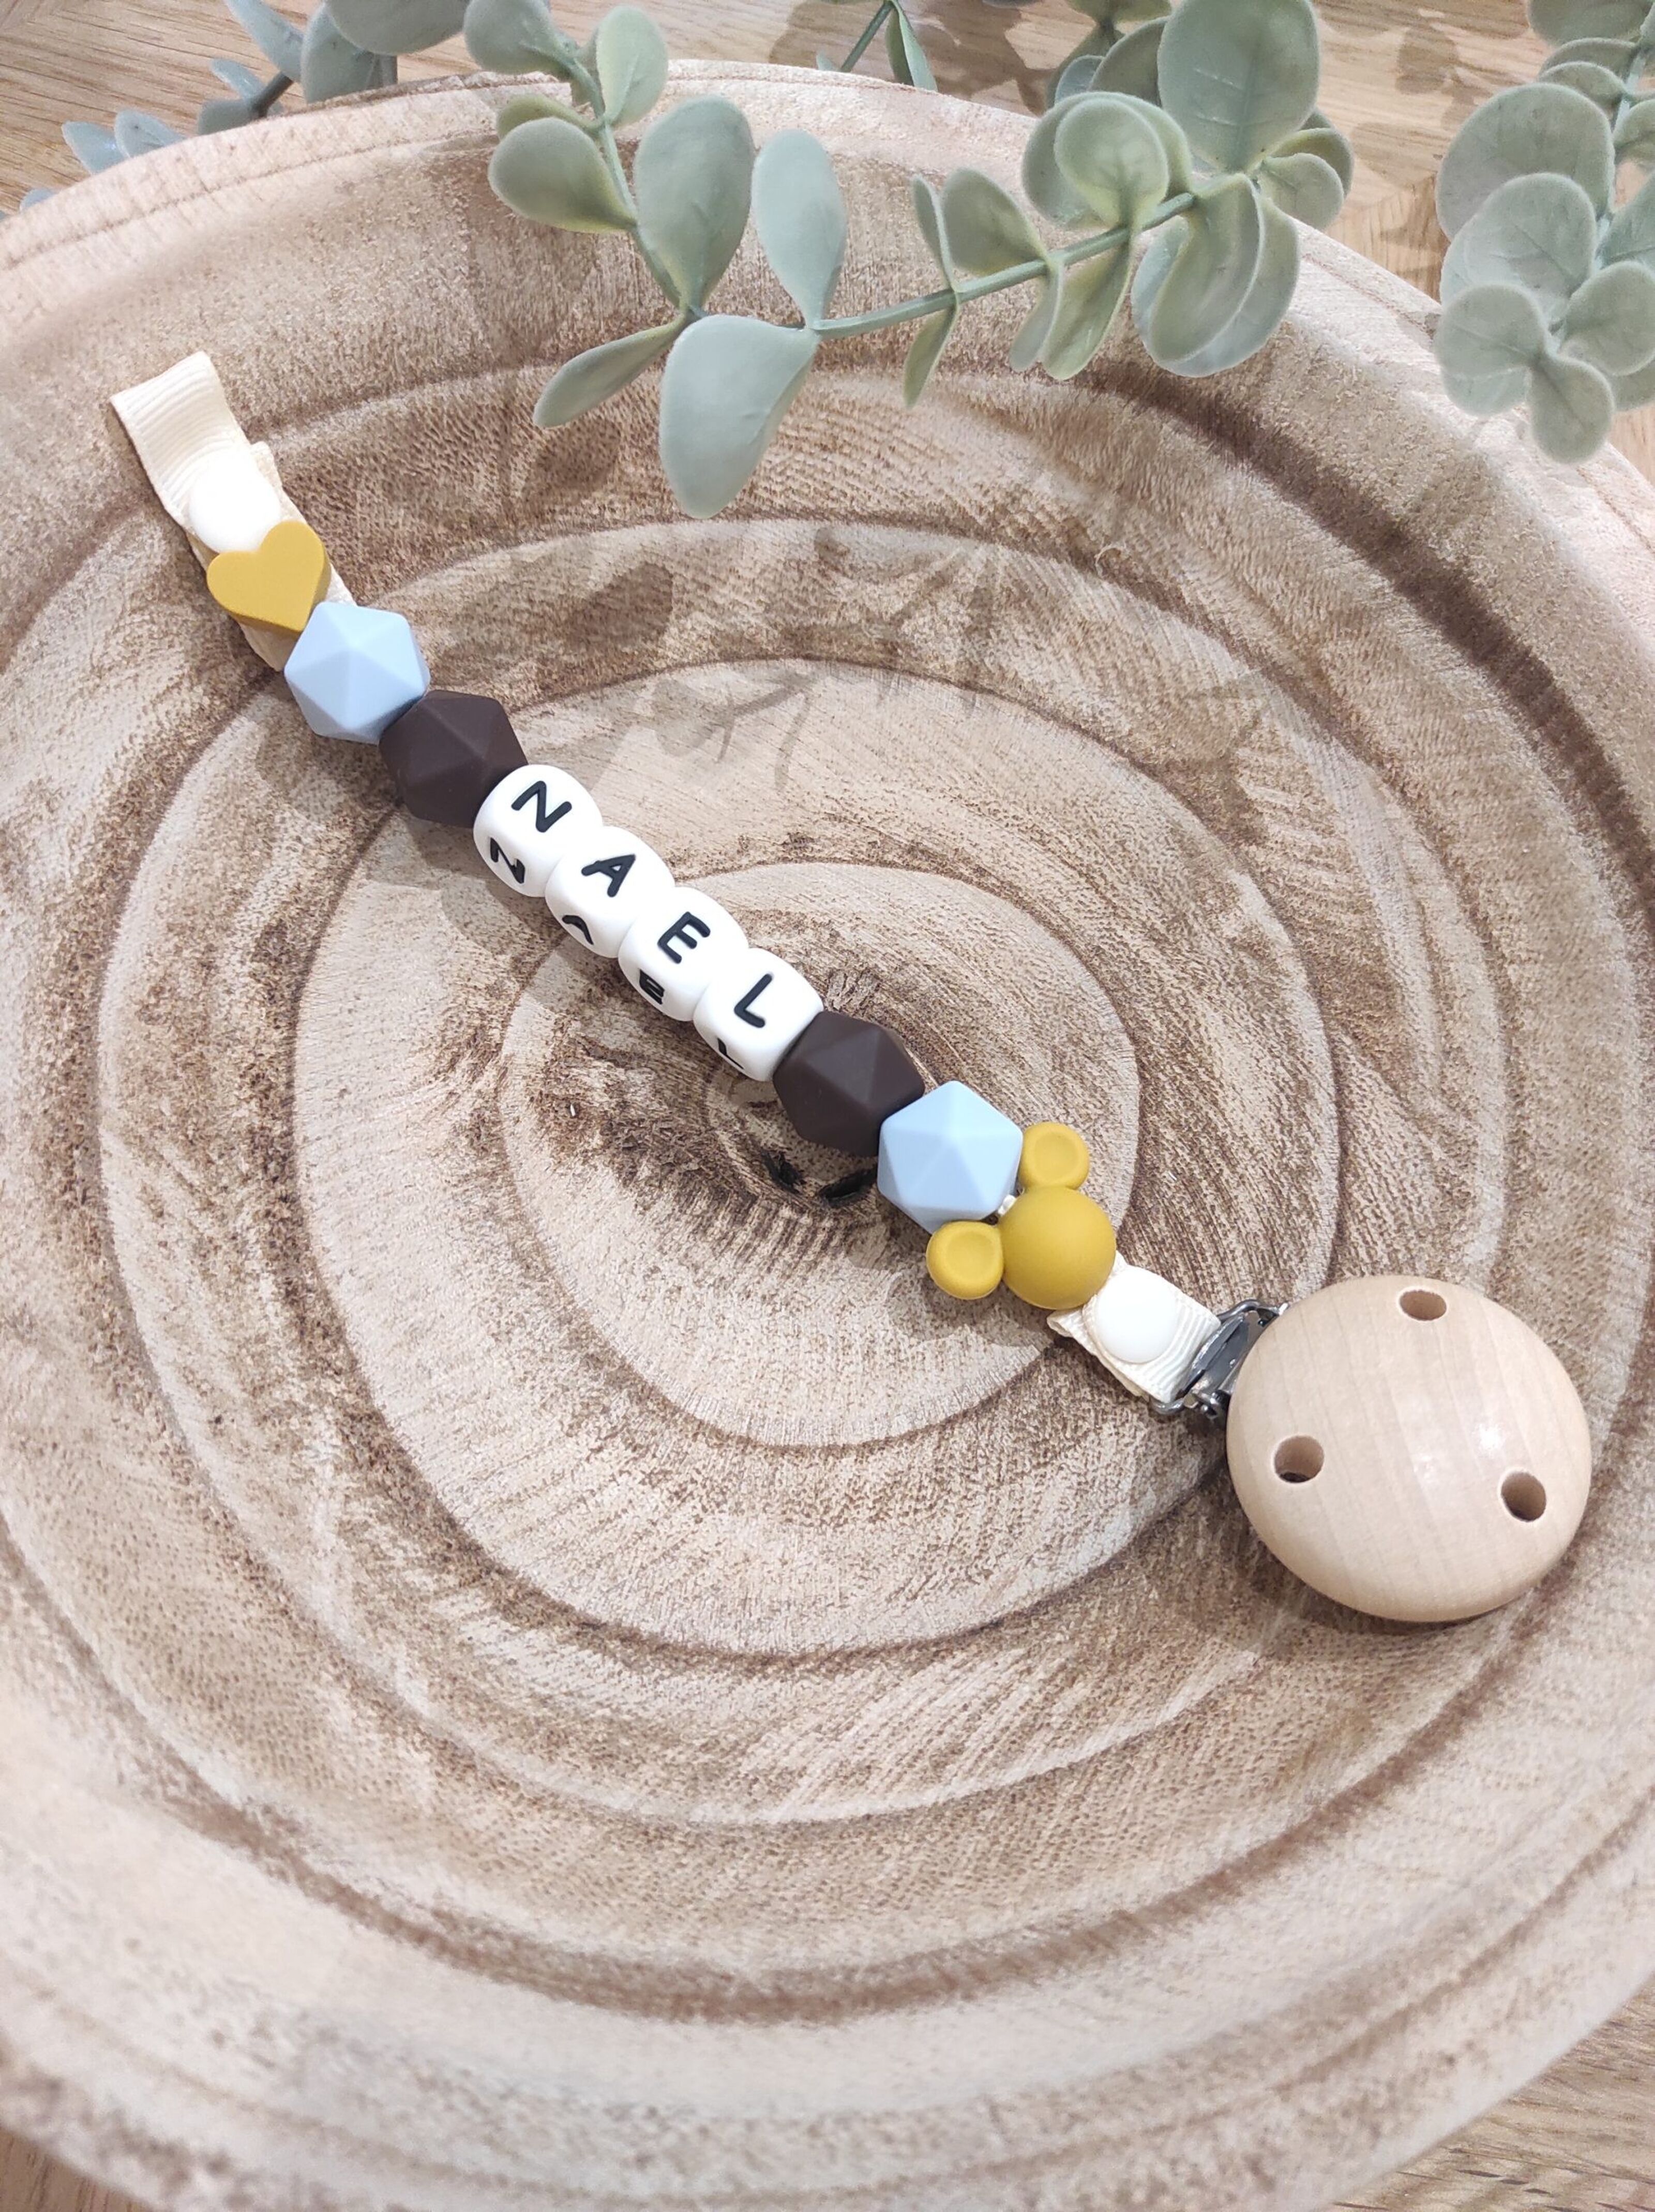 Teat Attachment, Pacifier Hook, Tutute, Cloud smiling Gray and Mustard  Yellow Tones, Birth Gift 